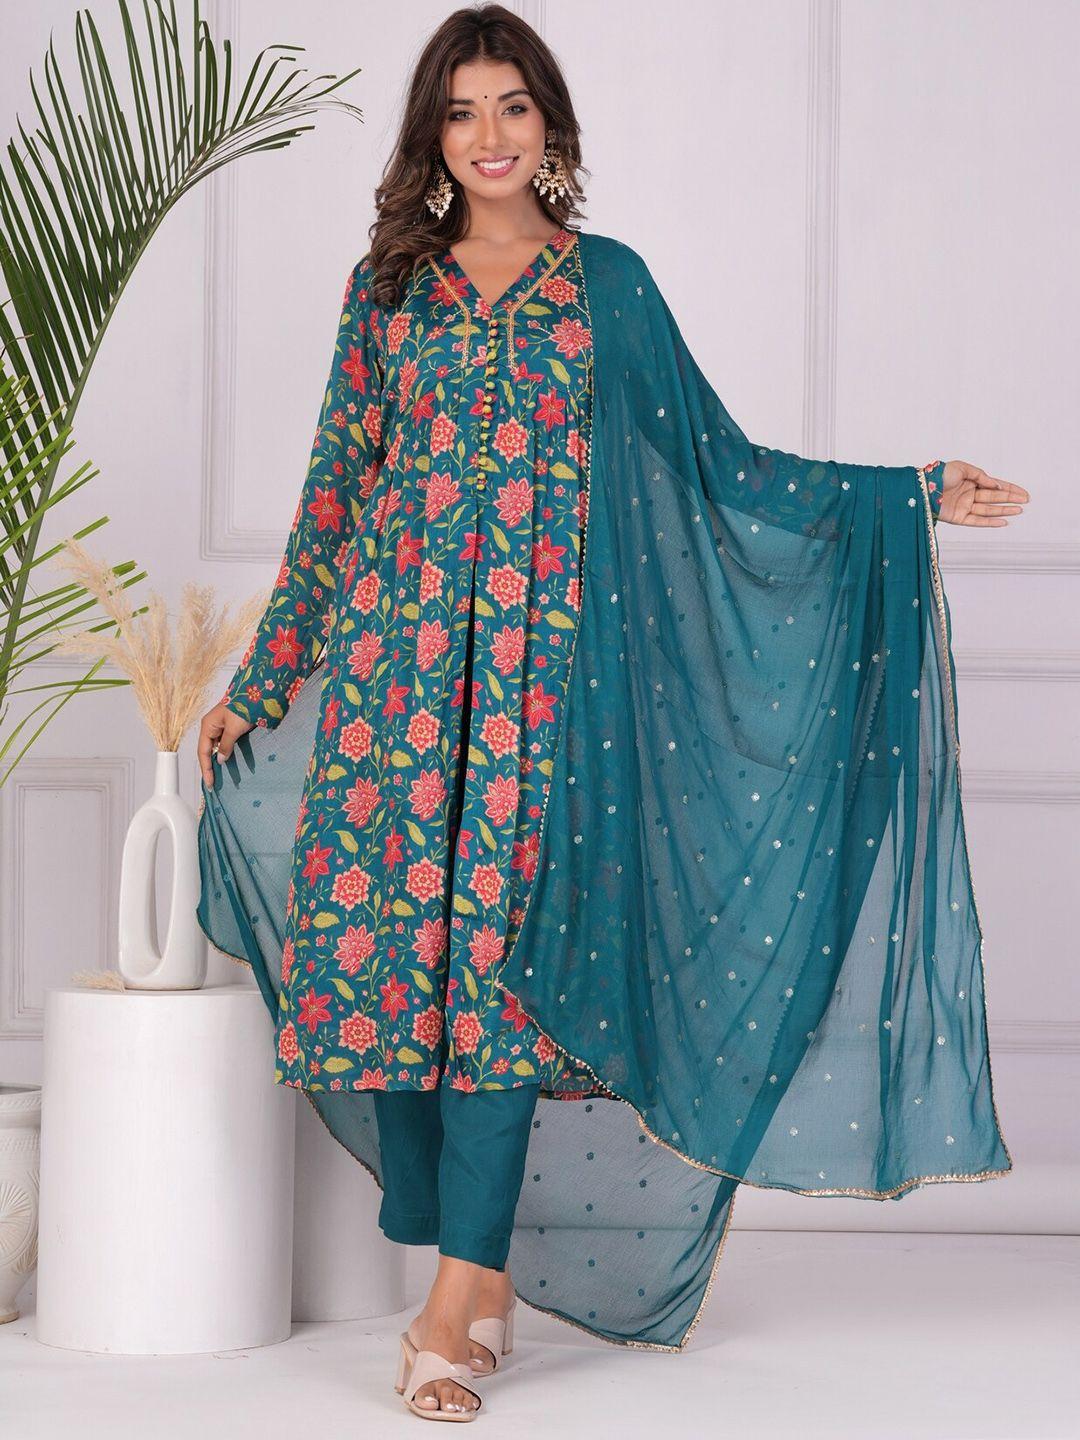 etnicawear floral printed v-neck empire a-line kurta & trousers with dupatta